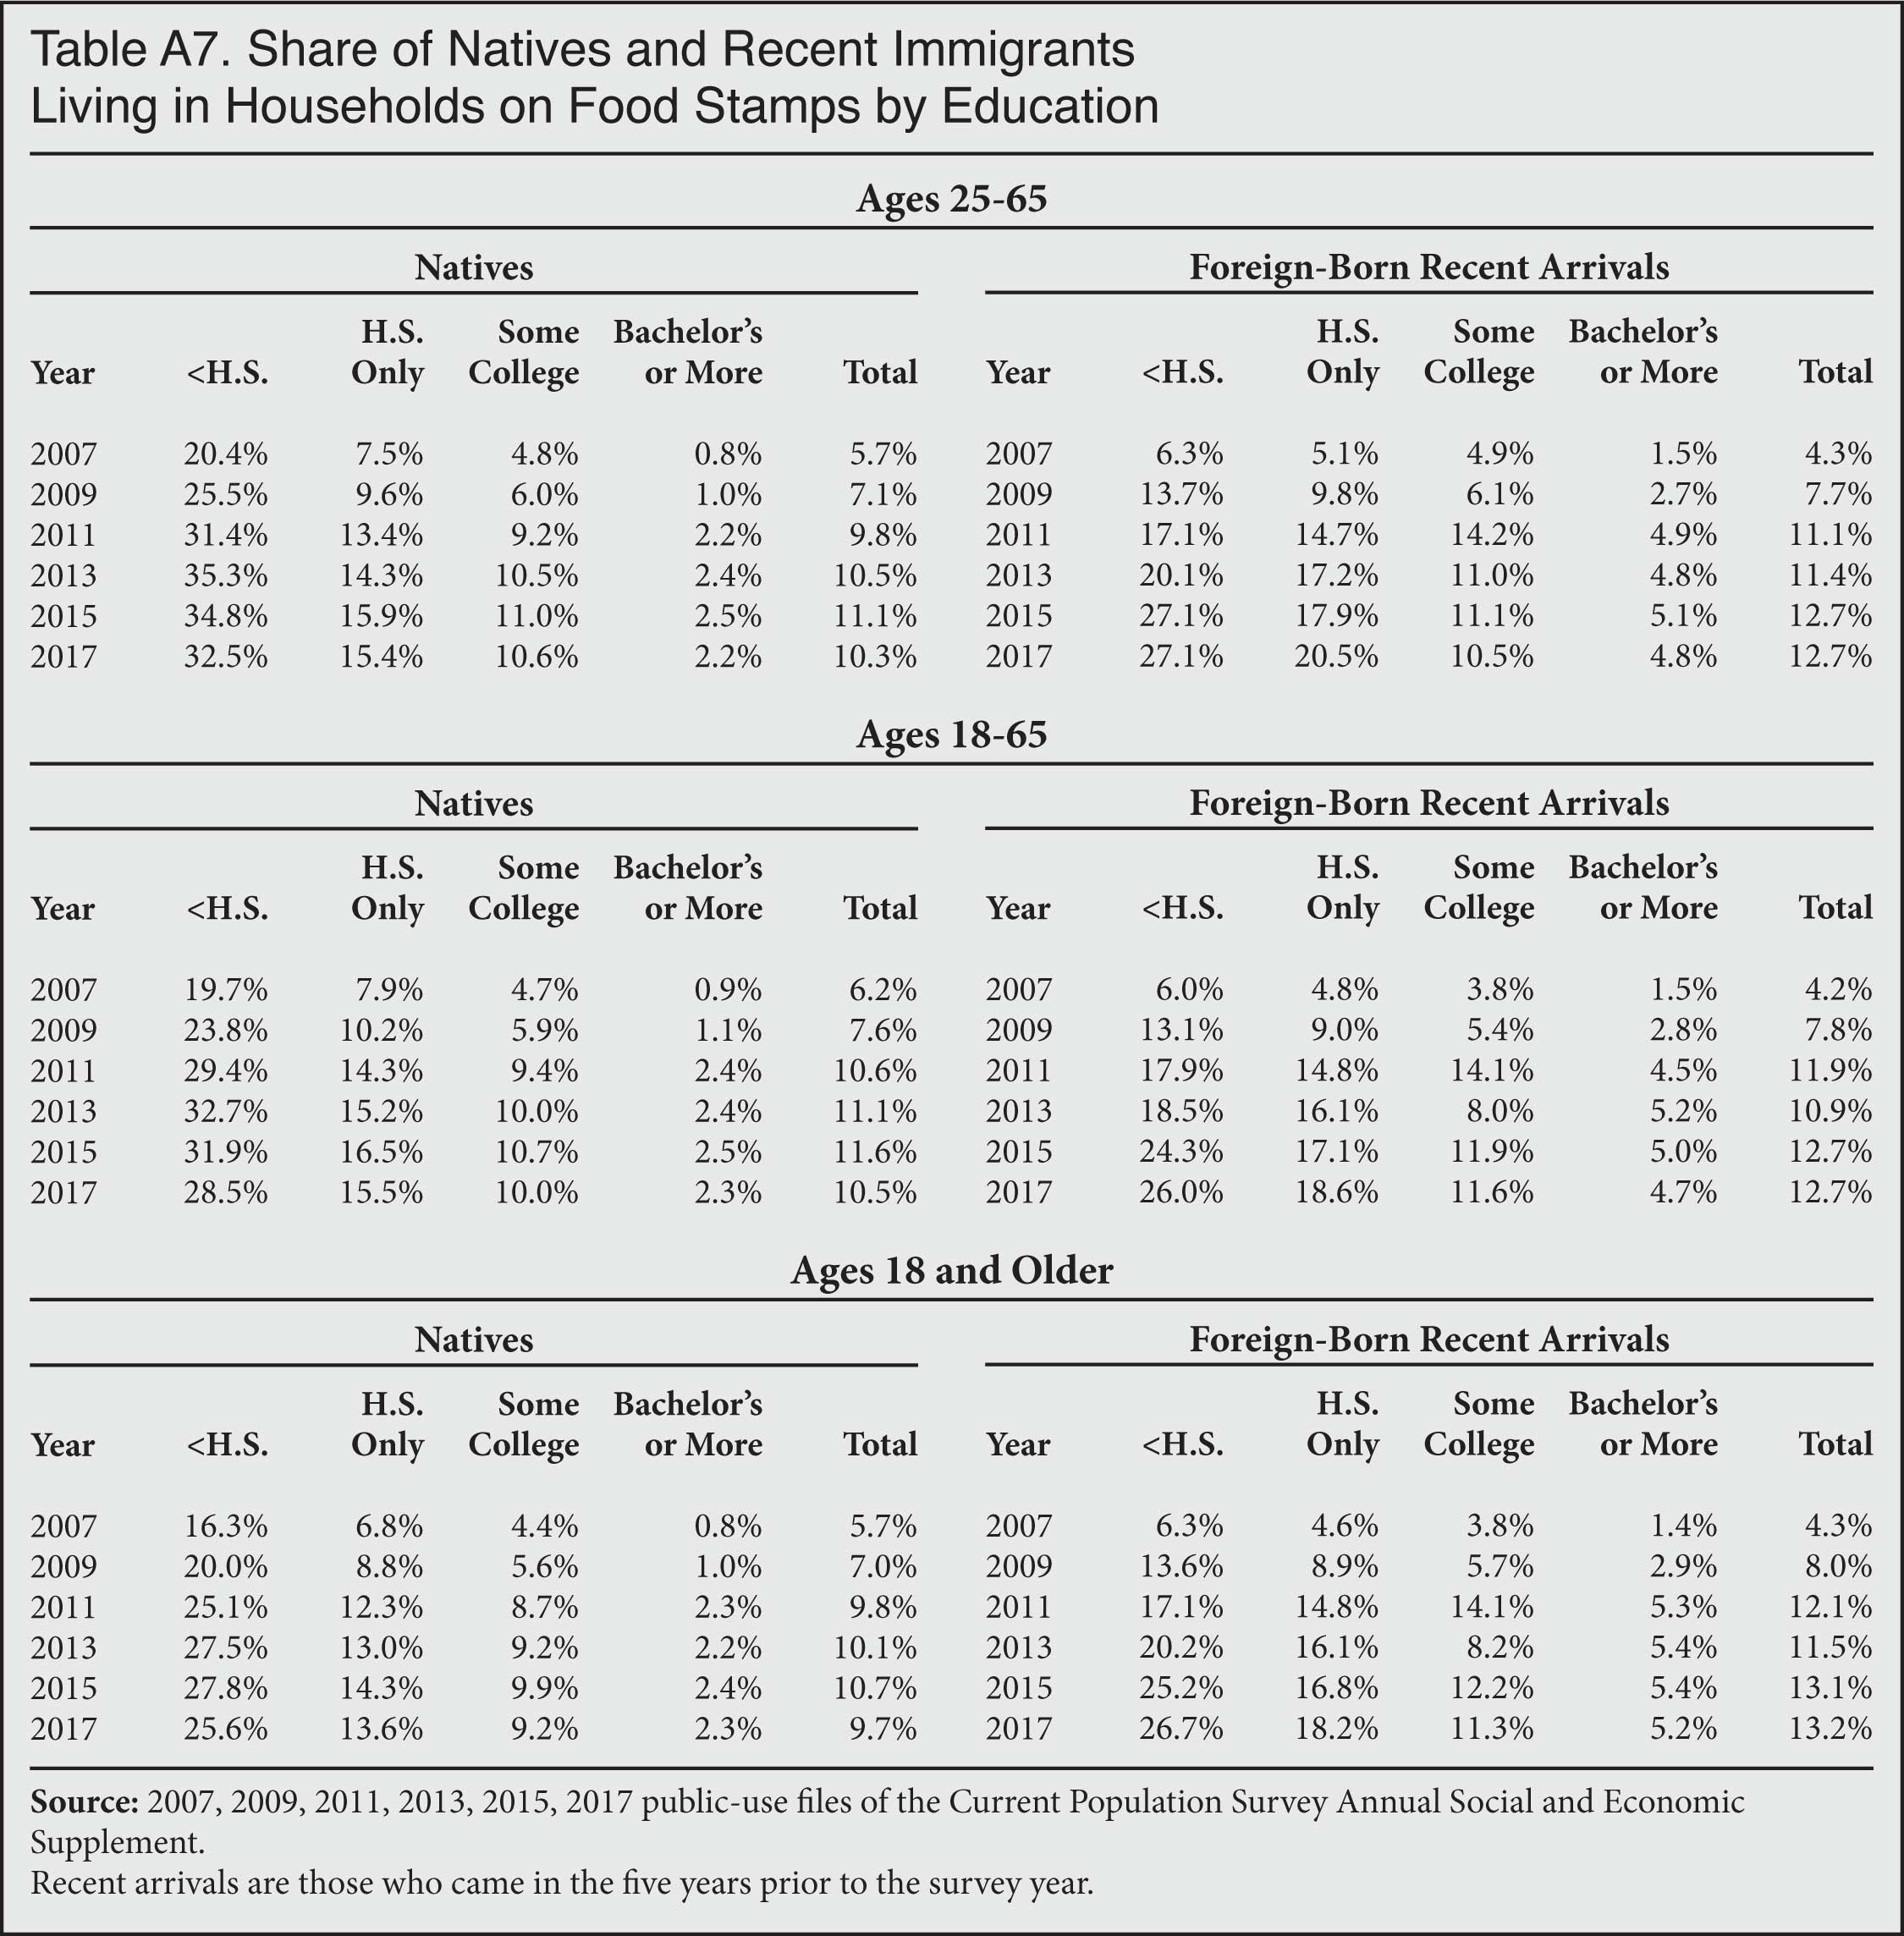 Table: Share of Natives and Recent Immigrants Living in Households on Food Stamps by Education, 2007-2017